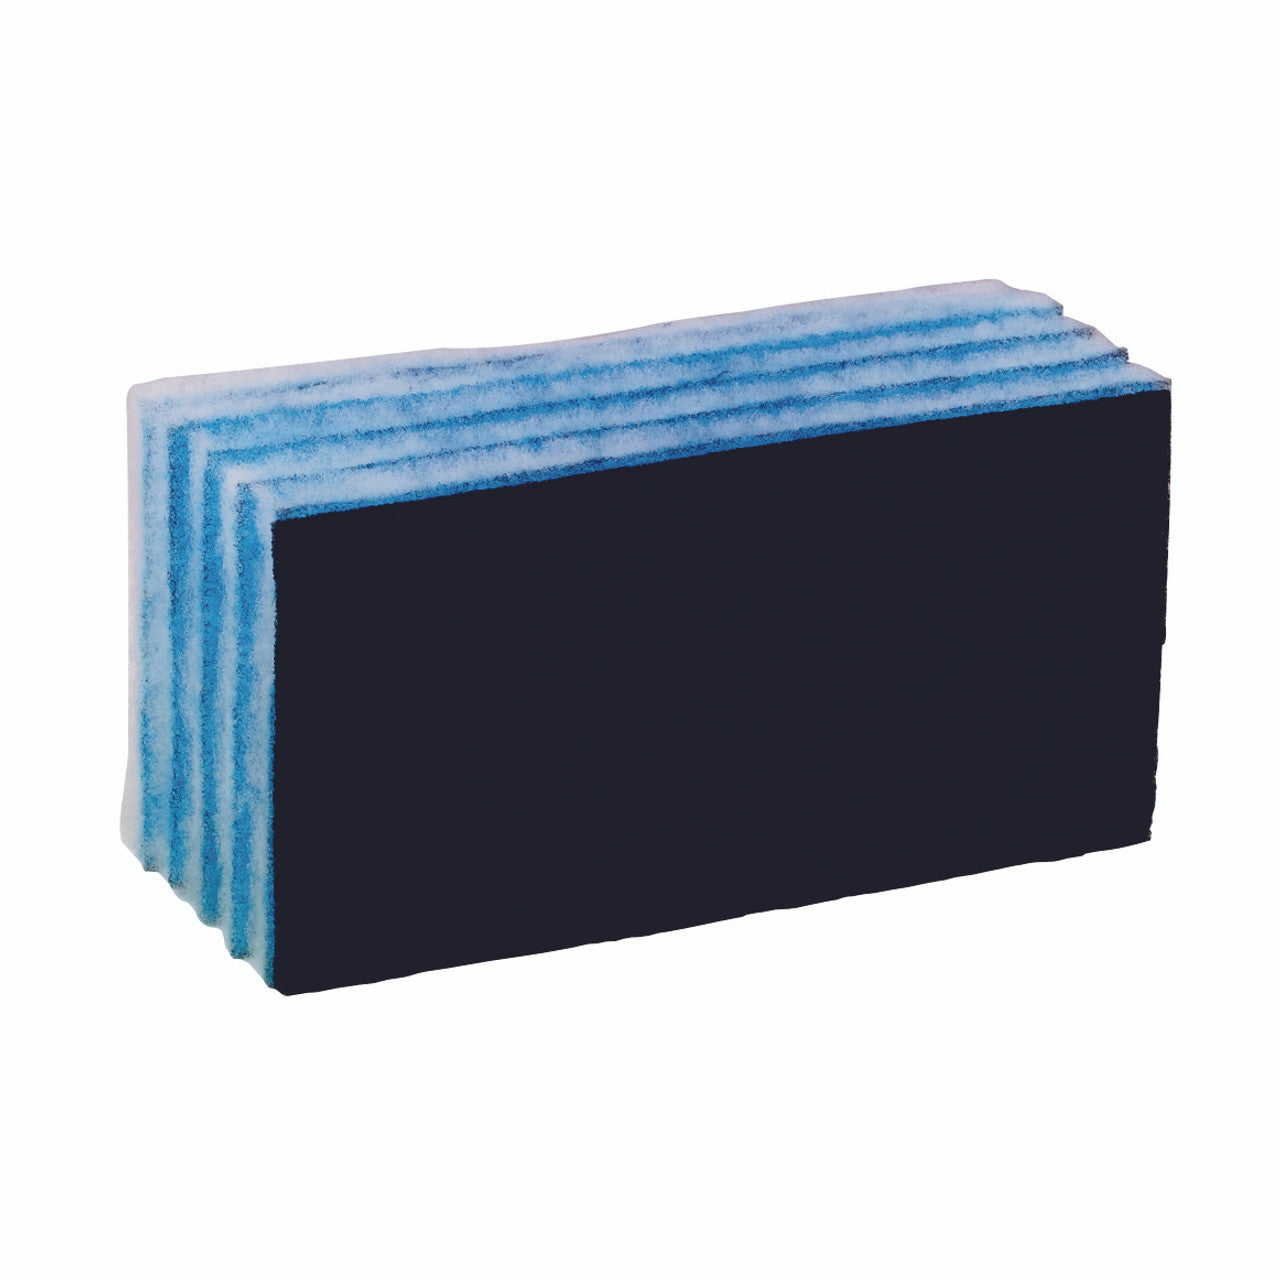 Cretors Disposable Filter 9" x 12" 1 piece for better performance of popcorn machines.